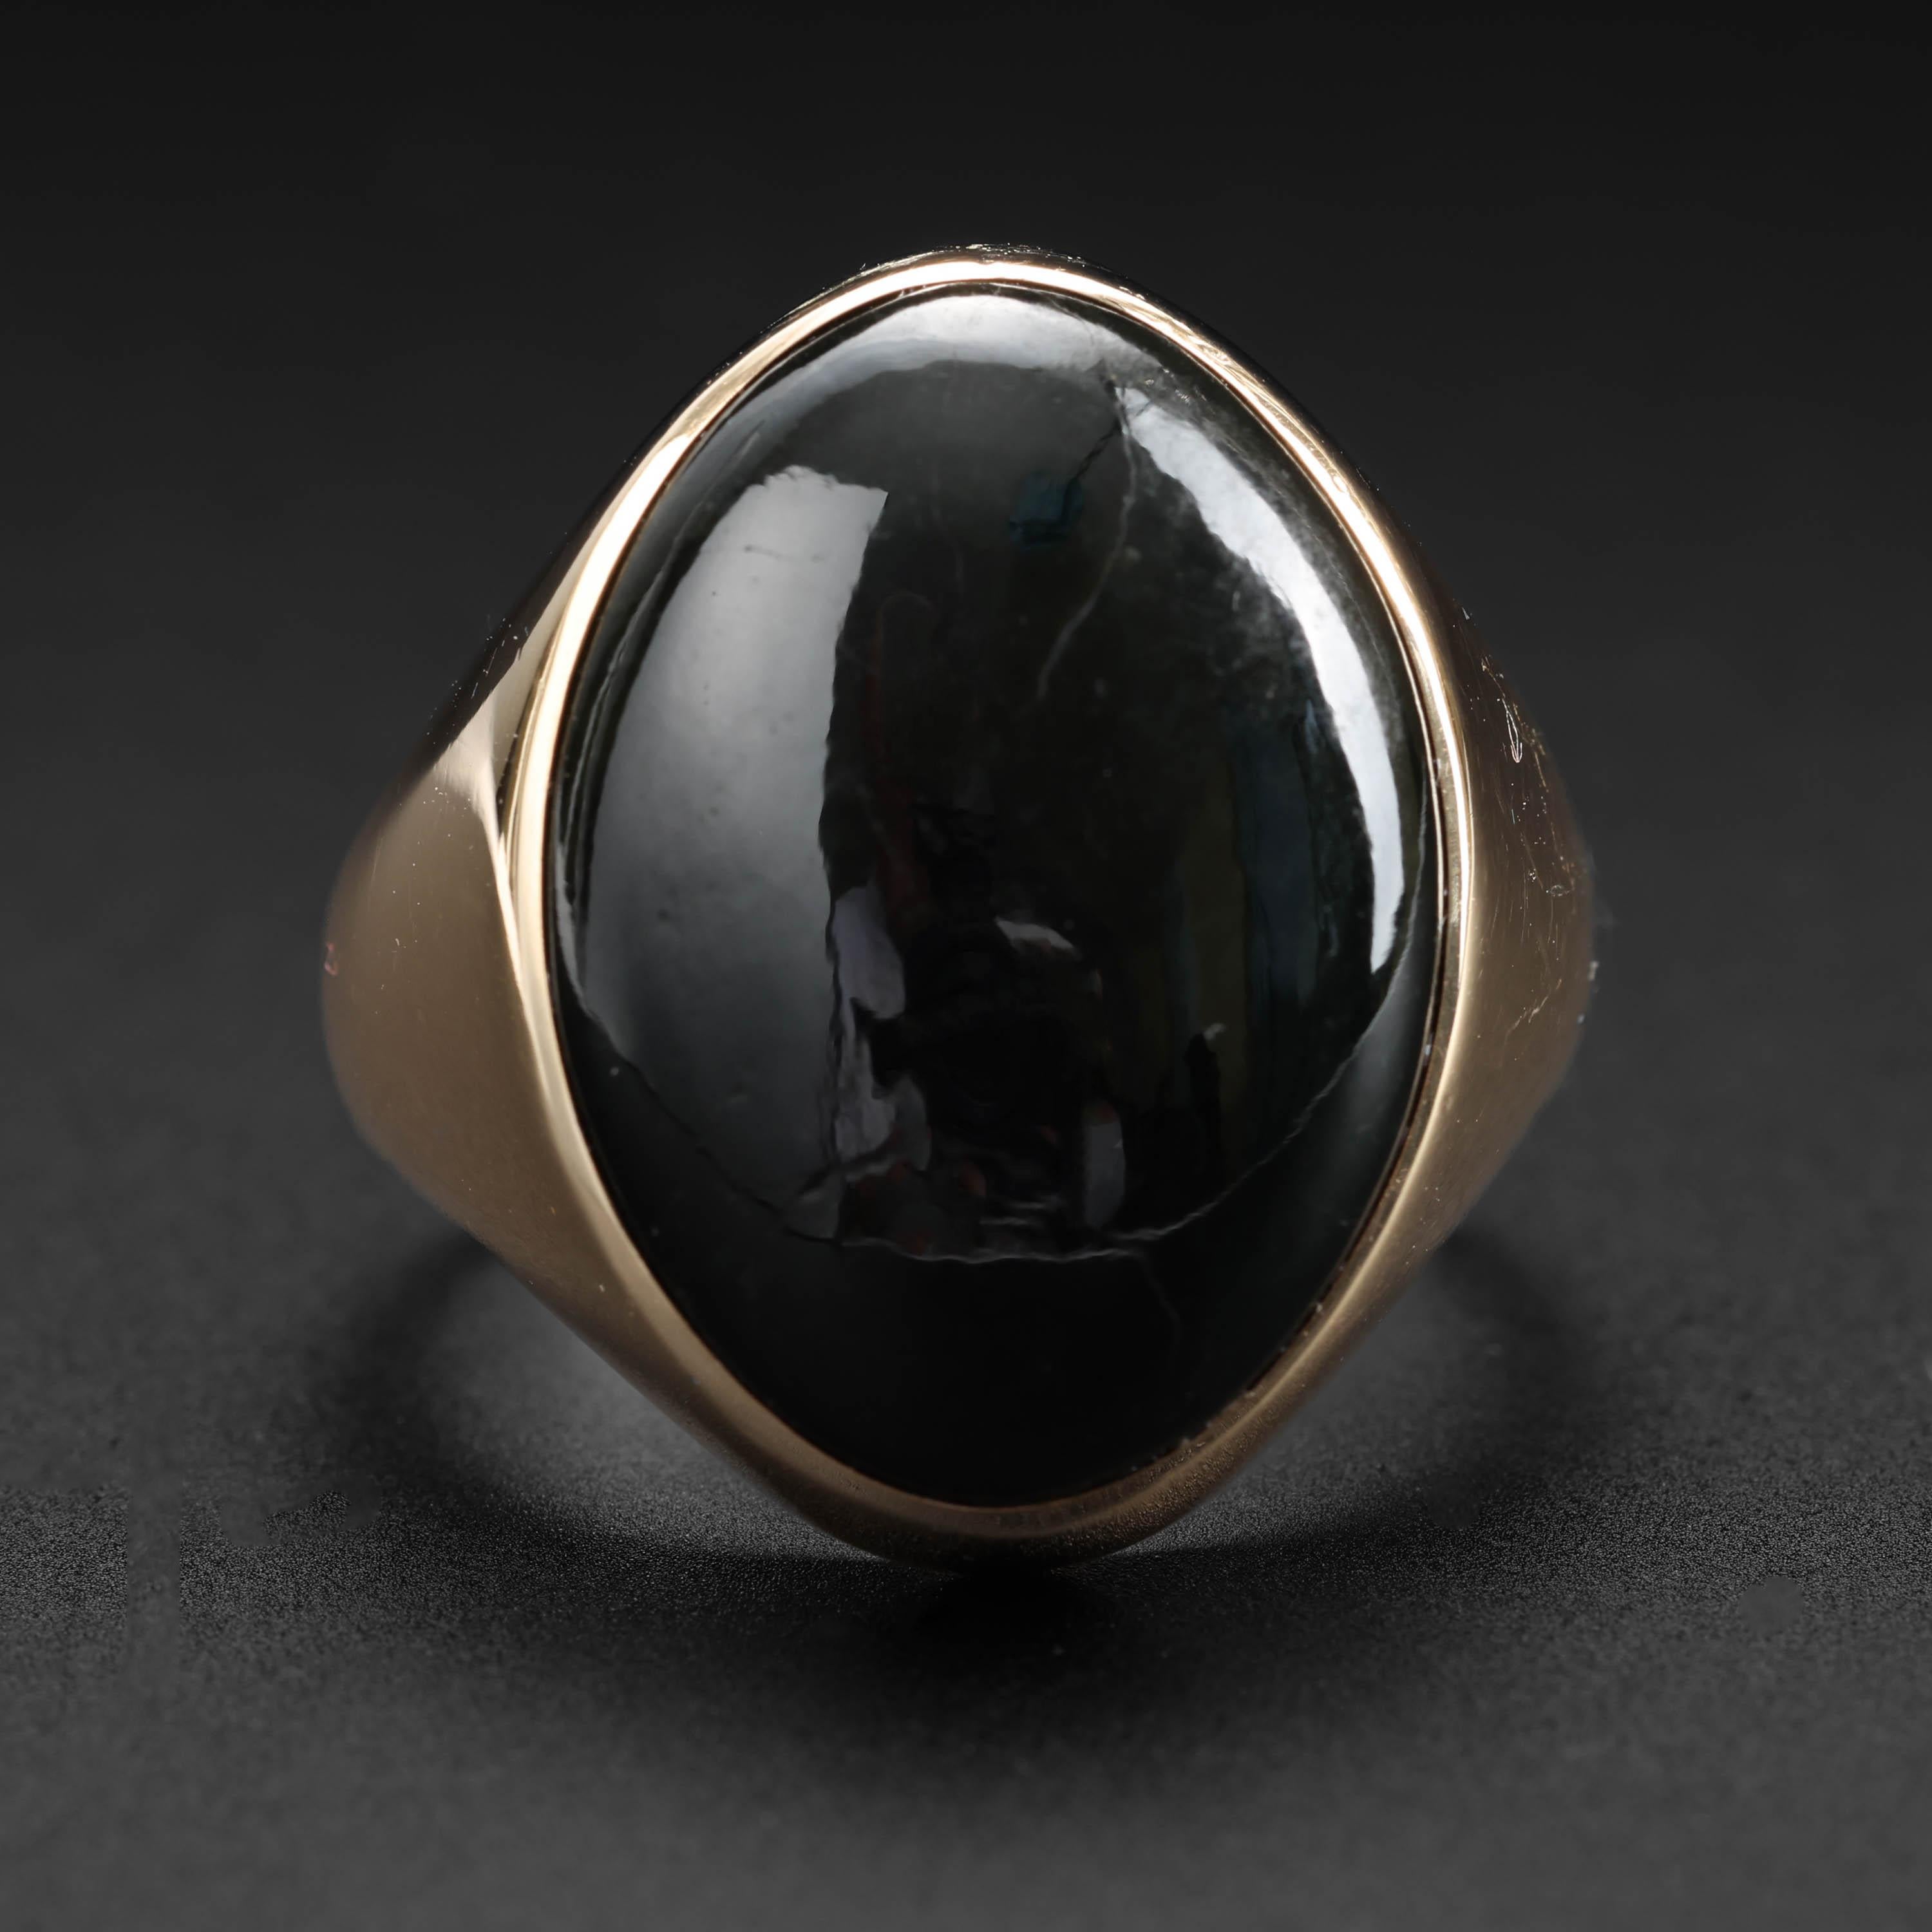 This classic midcentury (circa 1960s-1970s) black jade ring features a cabochon of unique jade: half omphacite jade; half jadeite jade. The glossy piano-black natural and untreated jade stone is both bold and understated at the same time. The iconic